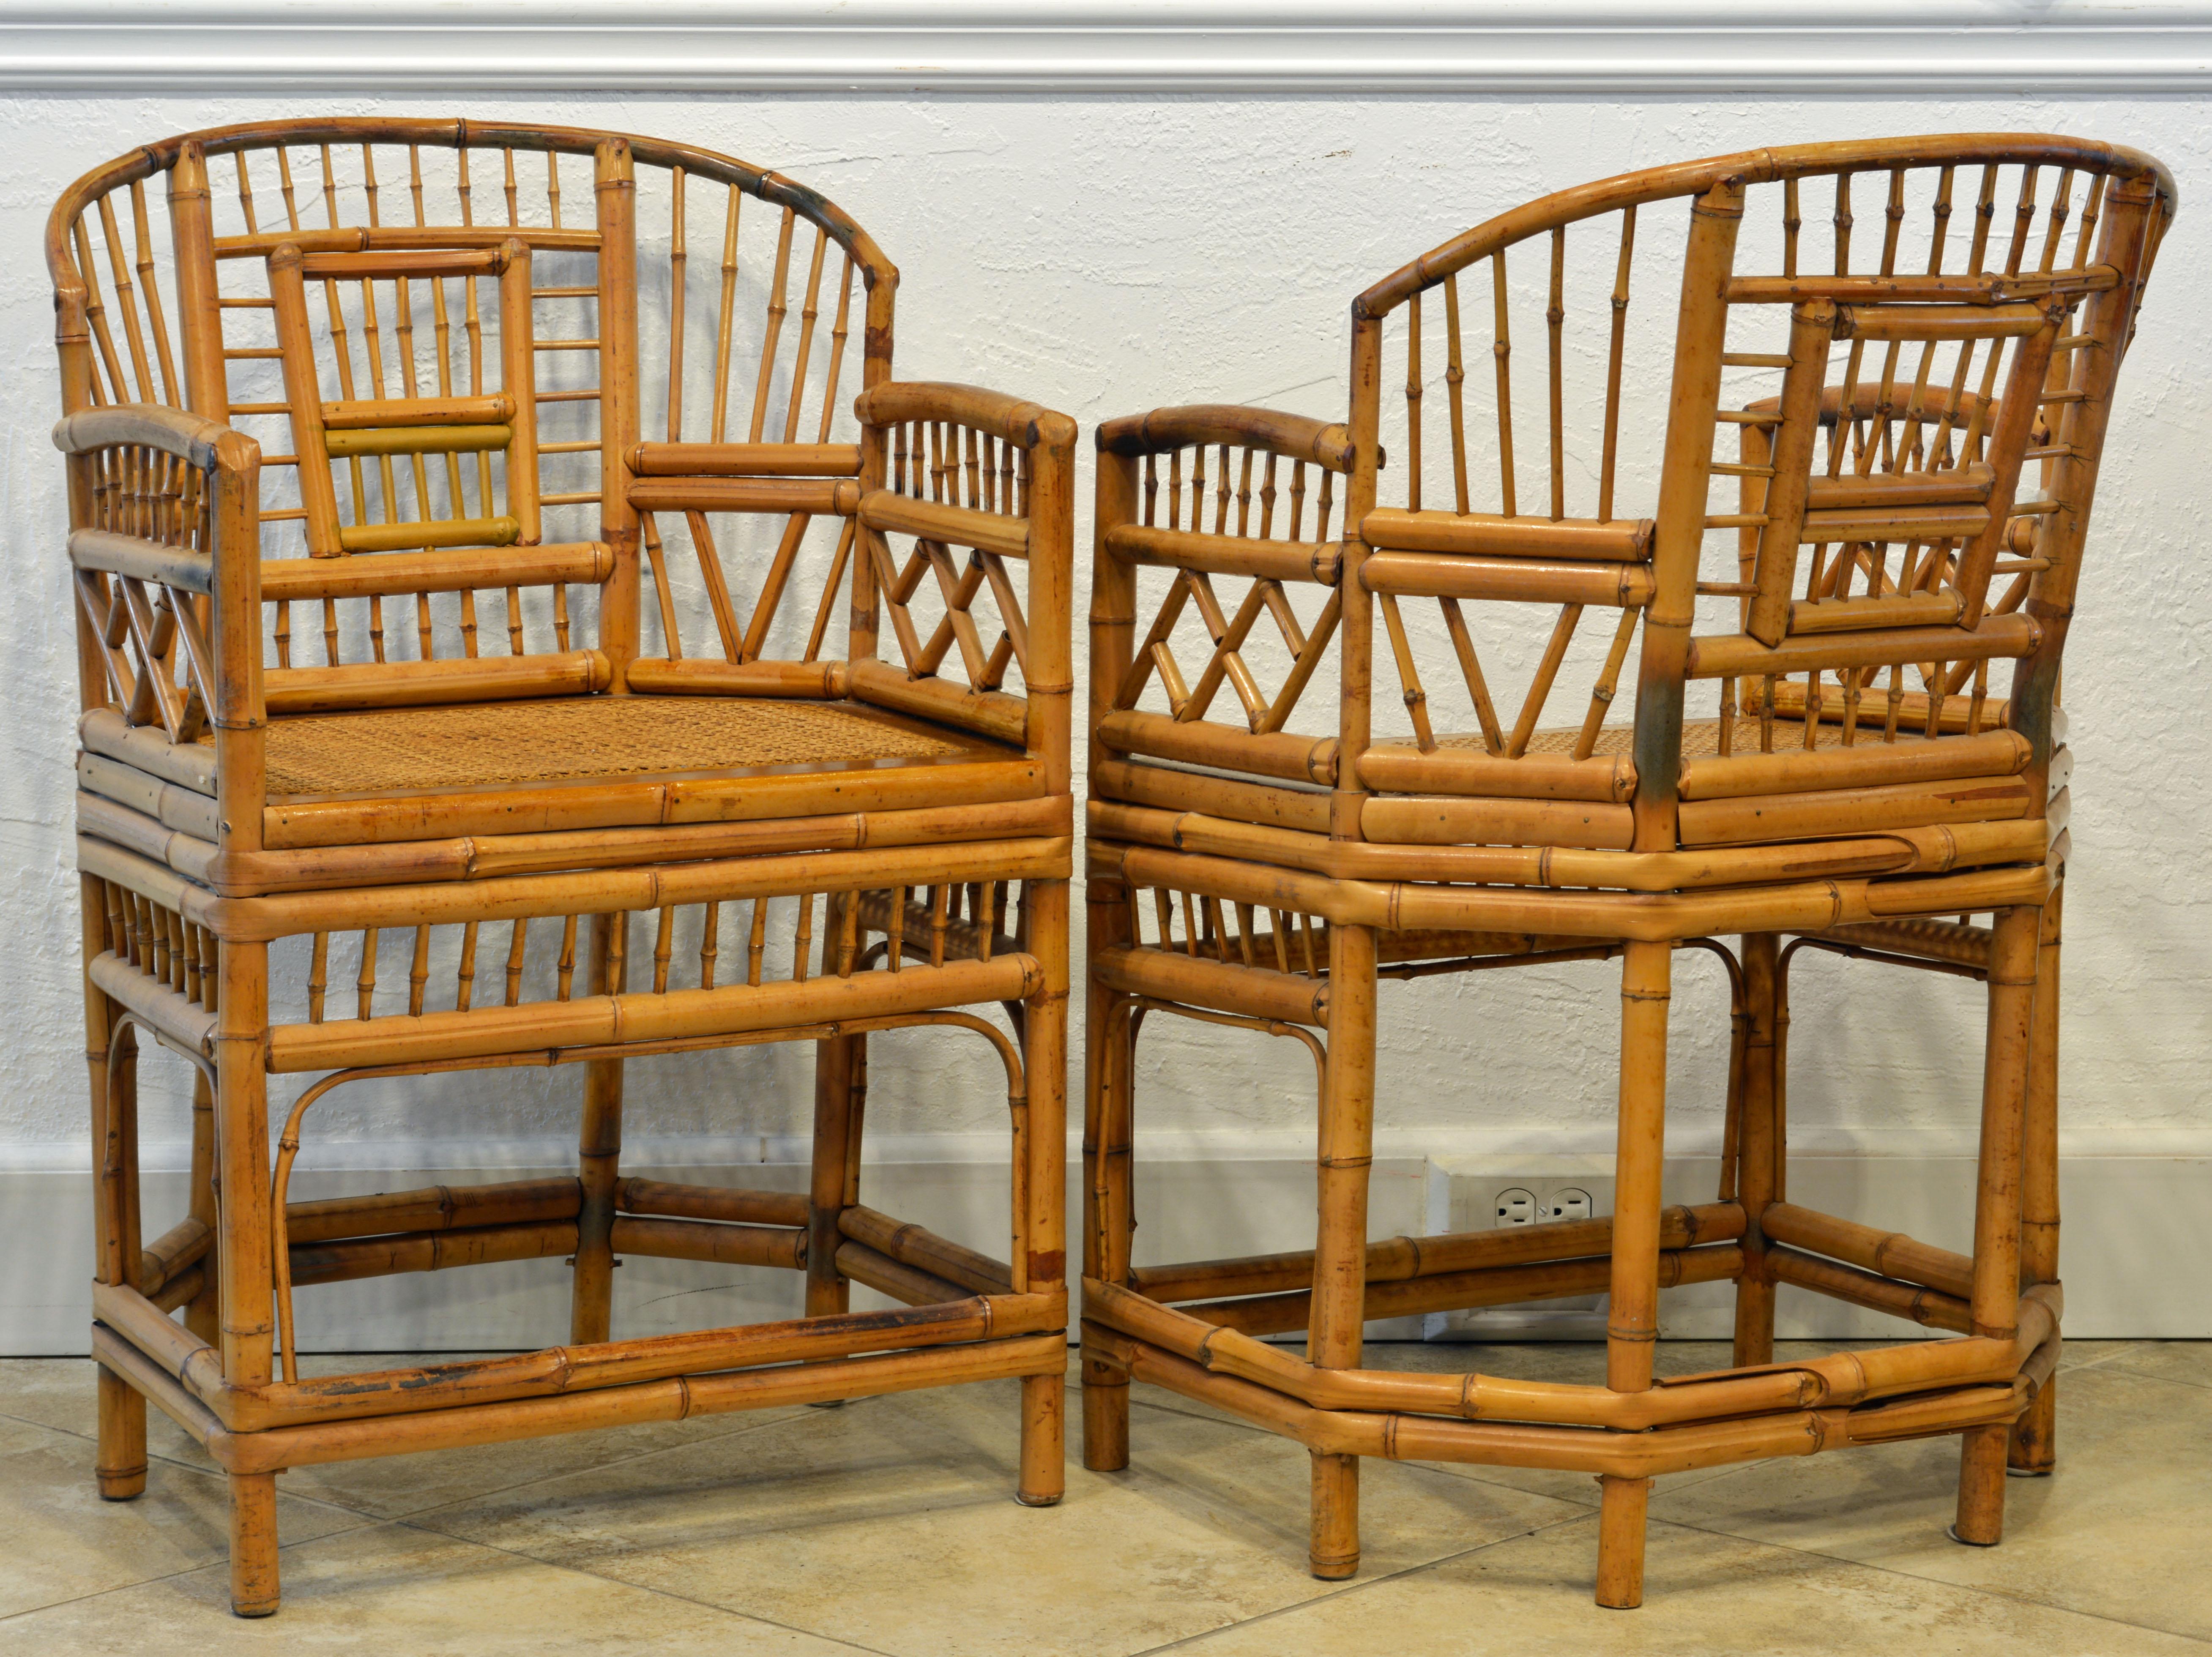 Rising on six legs these intricately crafted iconic armchairs with cane seats feature bamboo frames and Chinese themed bamboo open work inspired by Chippendale design.